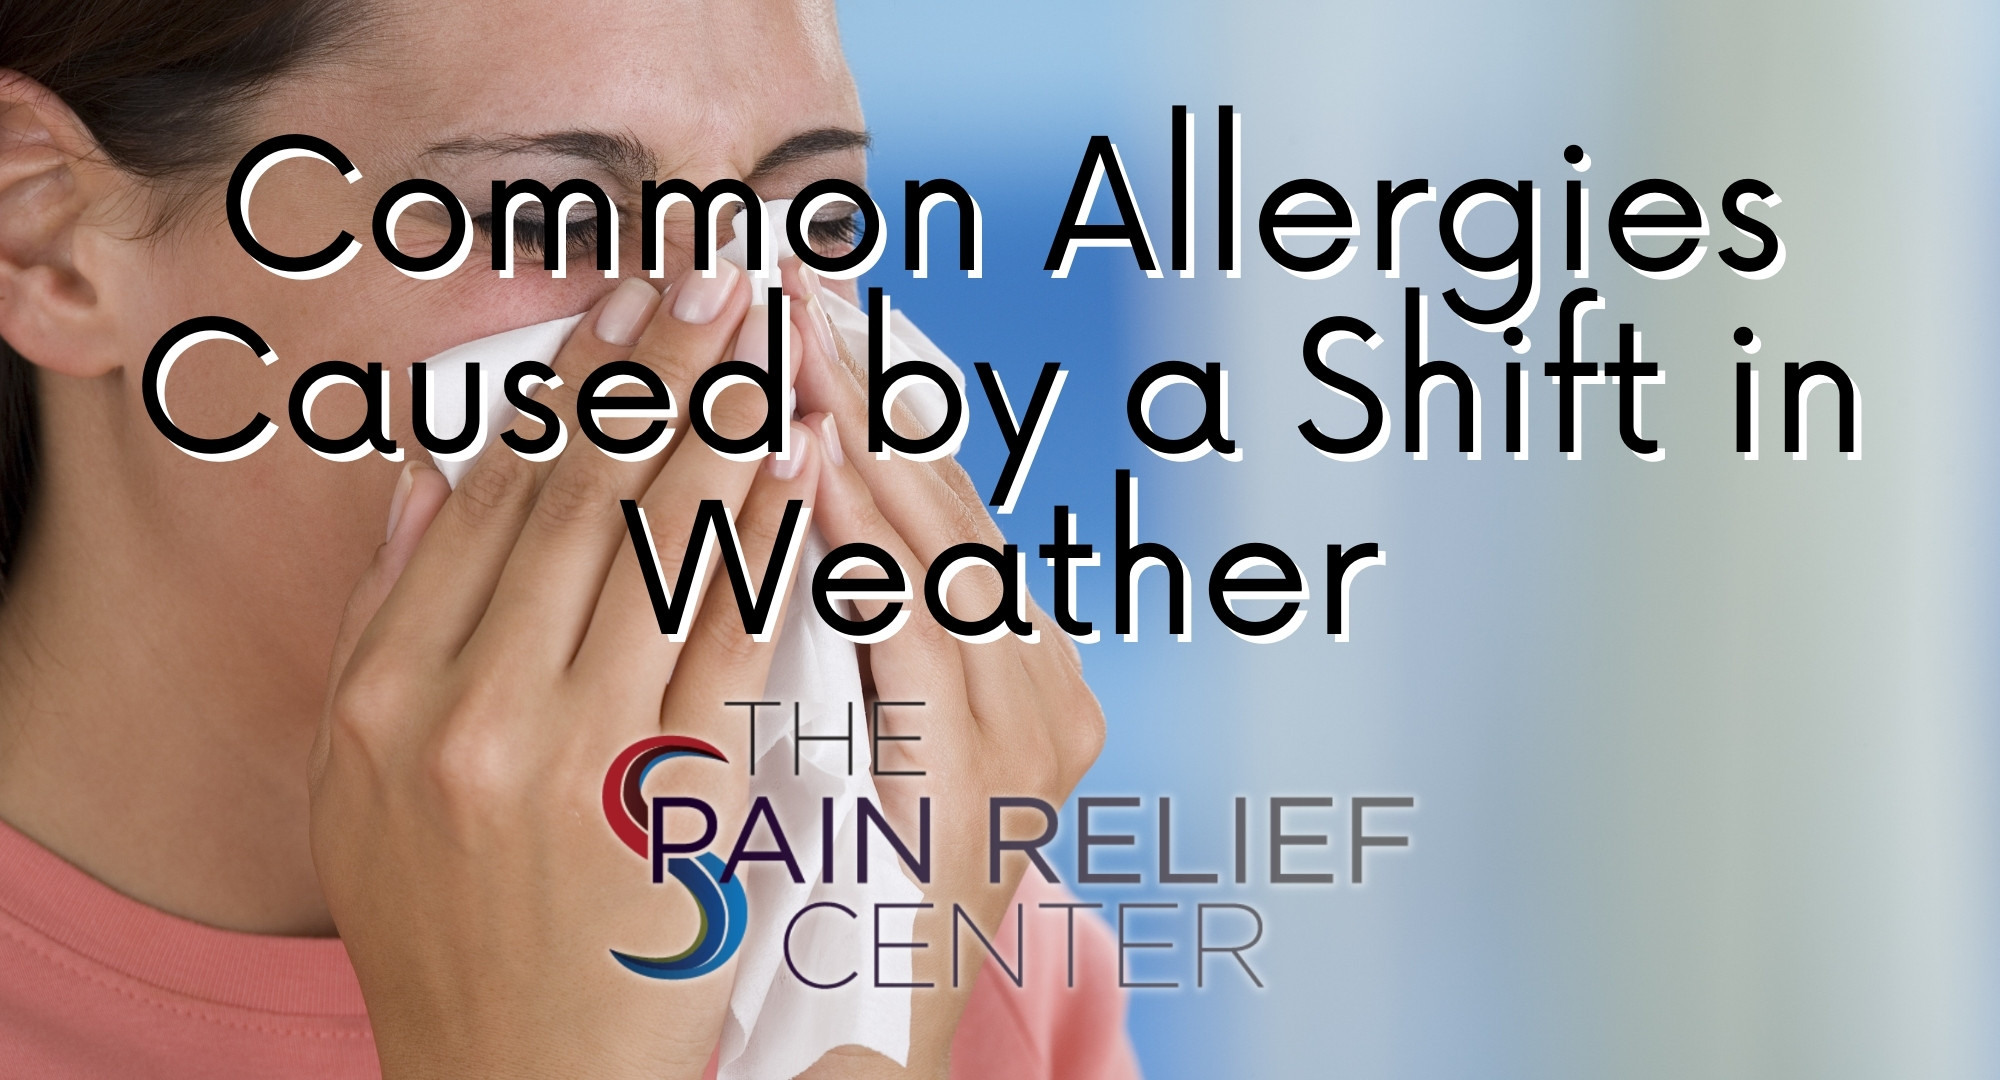 common allergies caused by weather changes